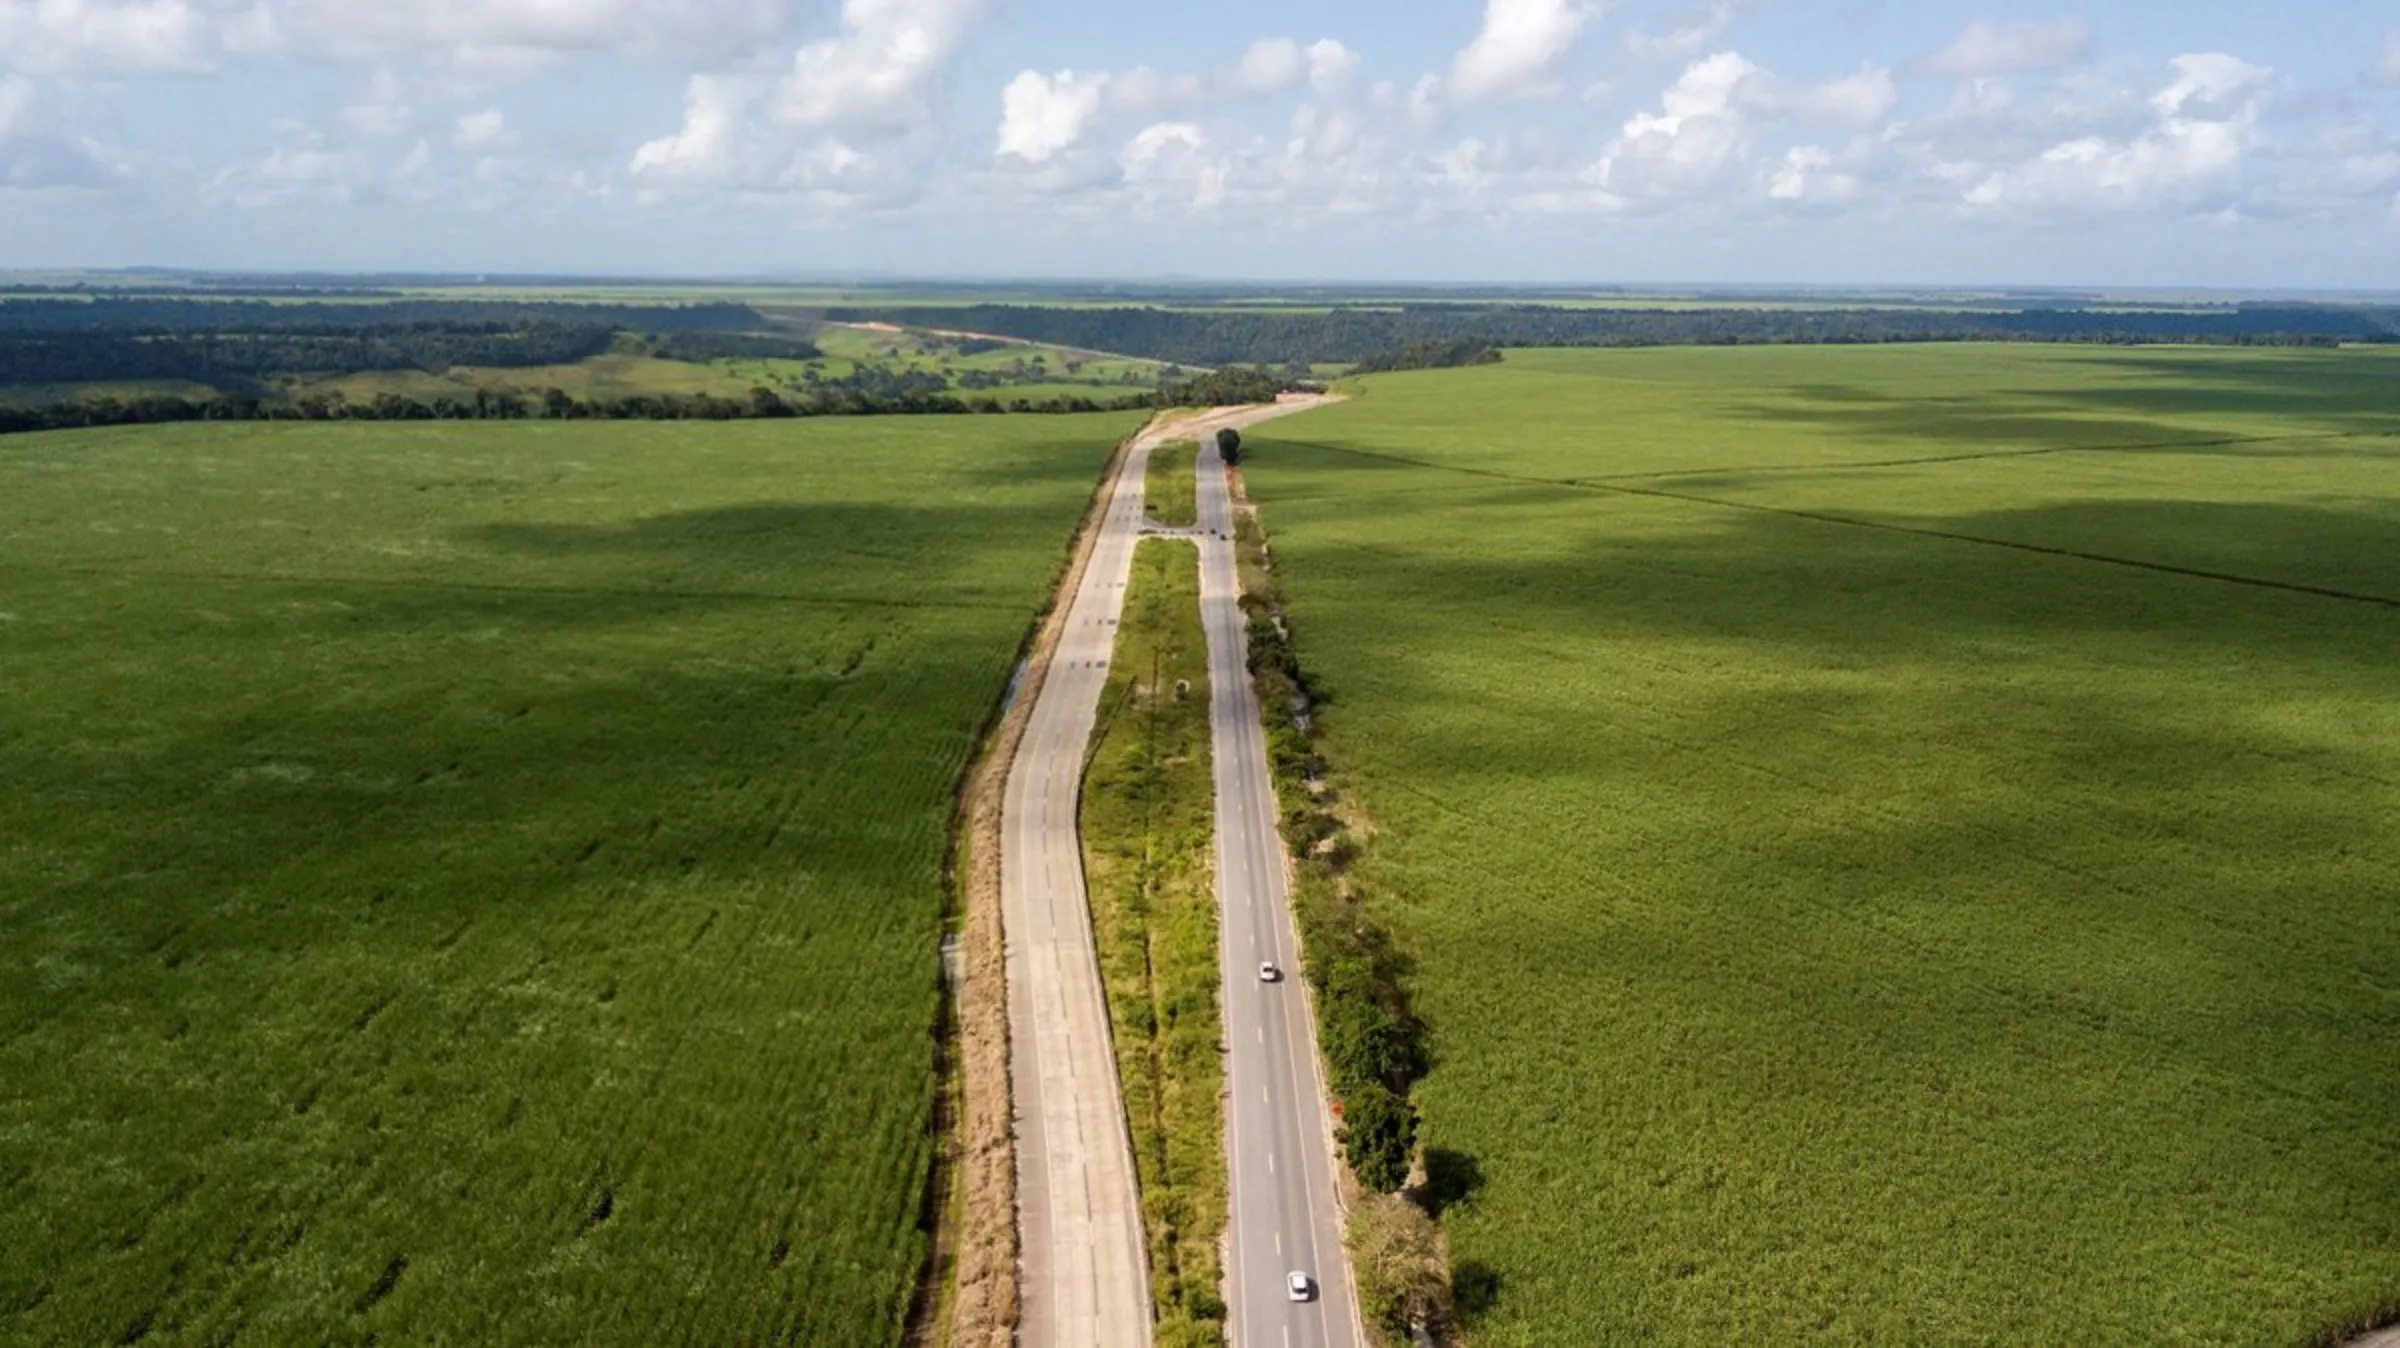 A federal highway in Brazil cuts through two sugarcane plantations in the state of Alagoas, September 26, 2021